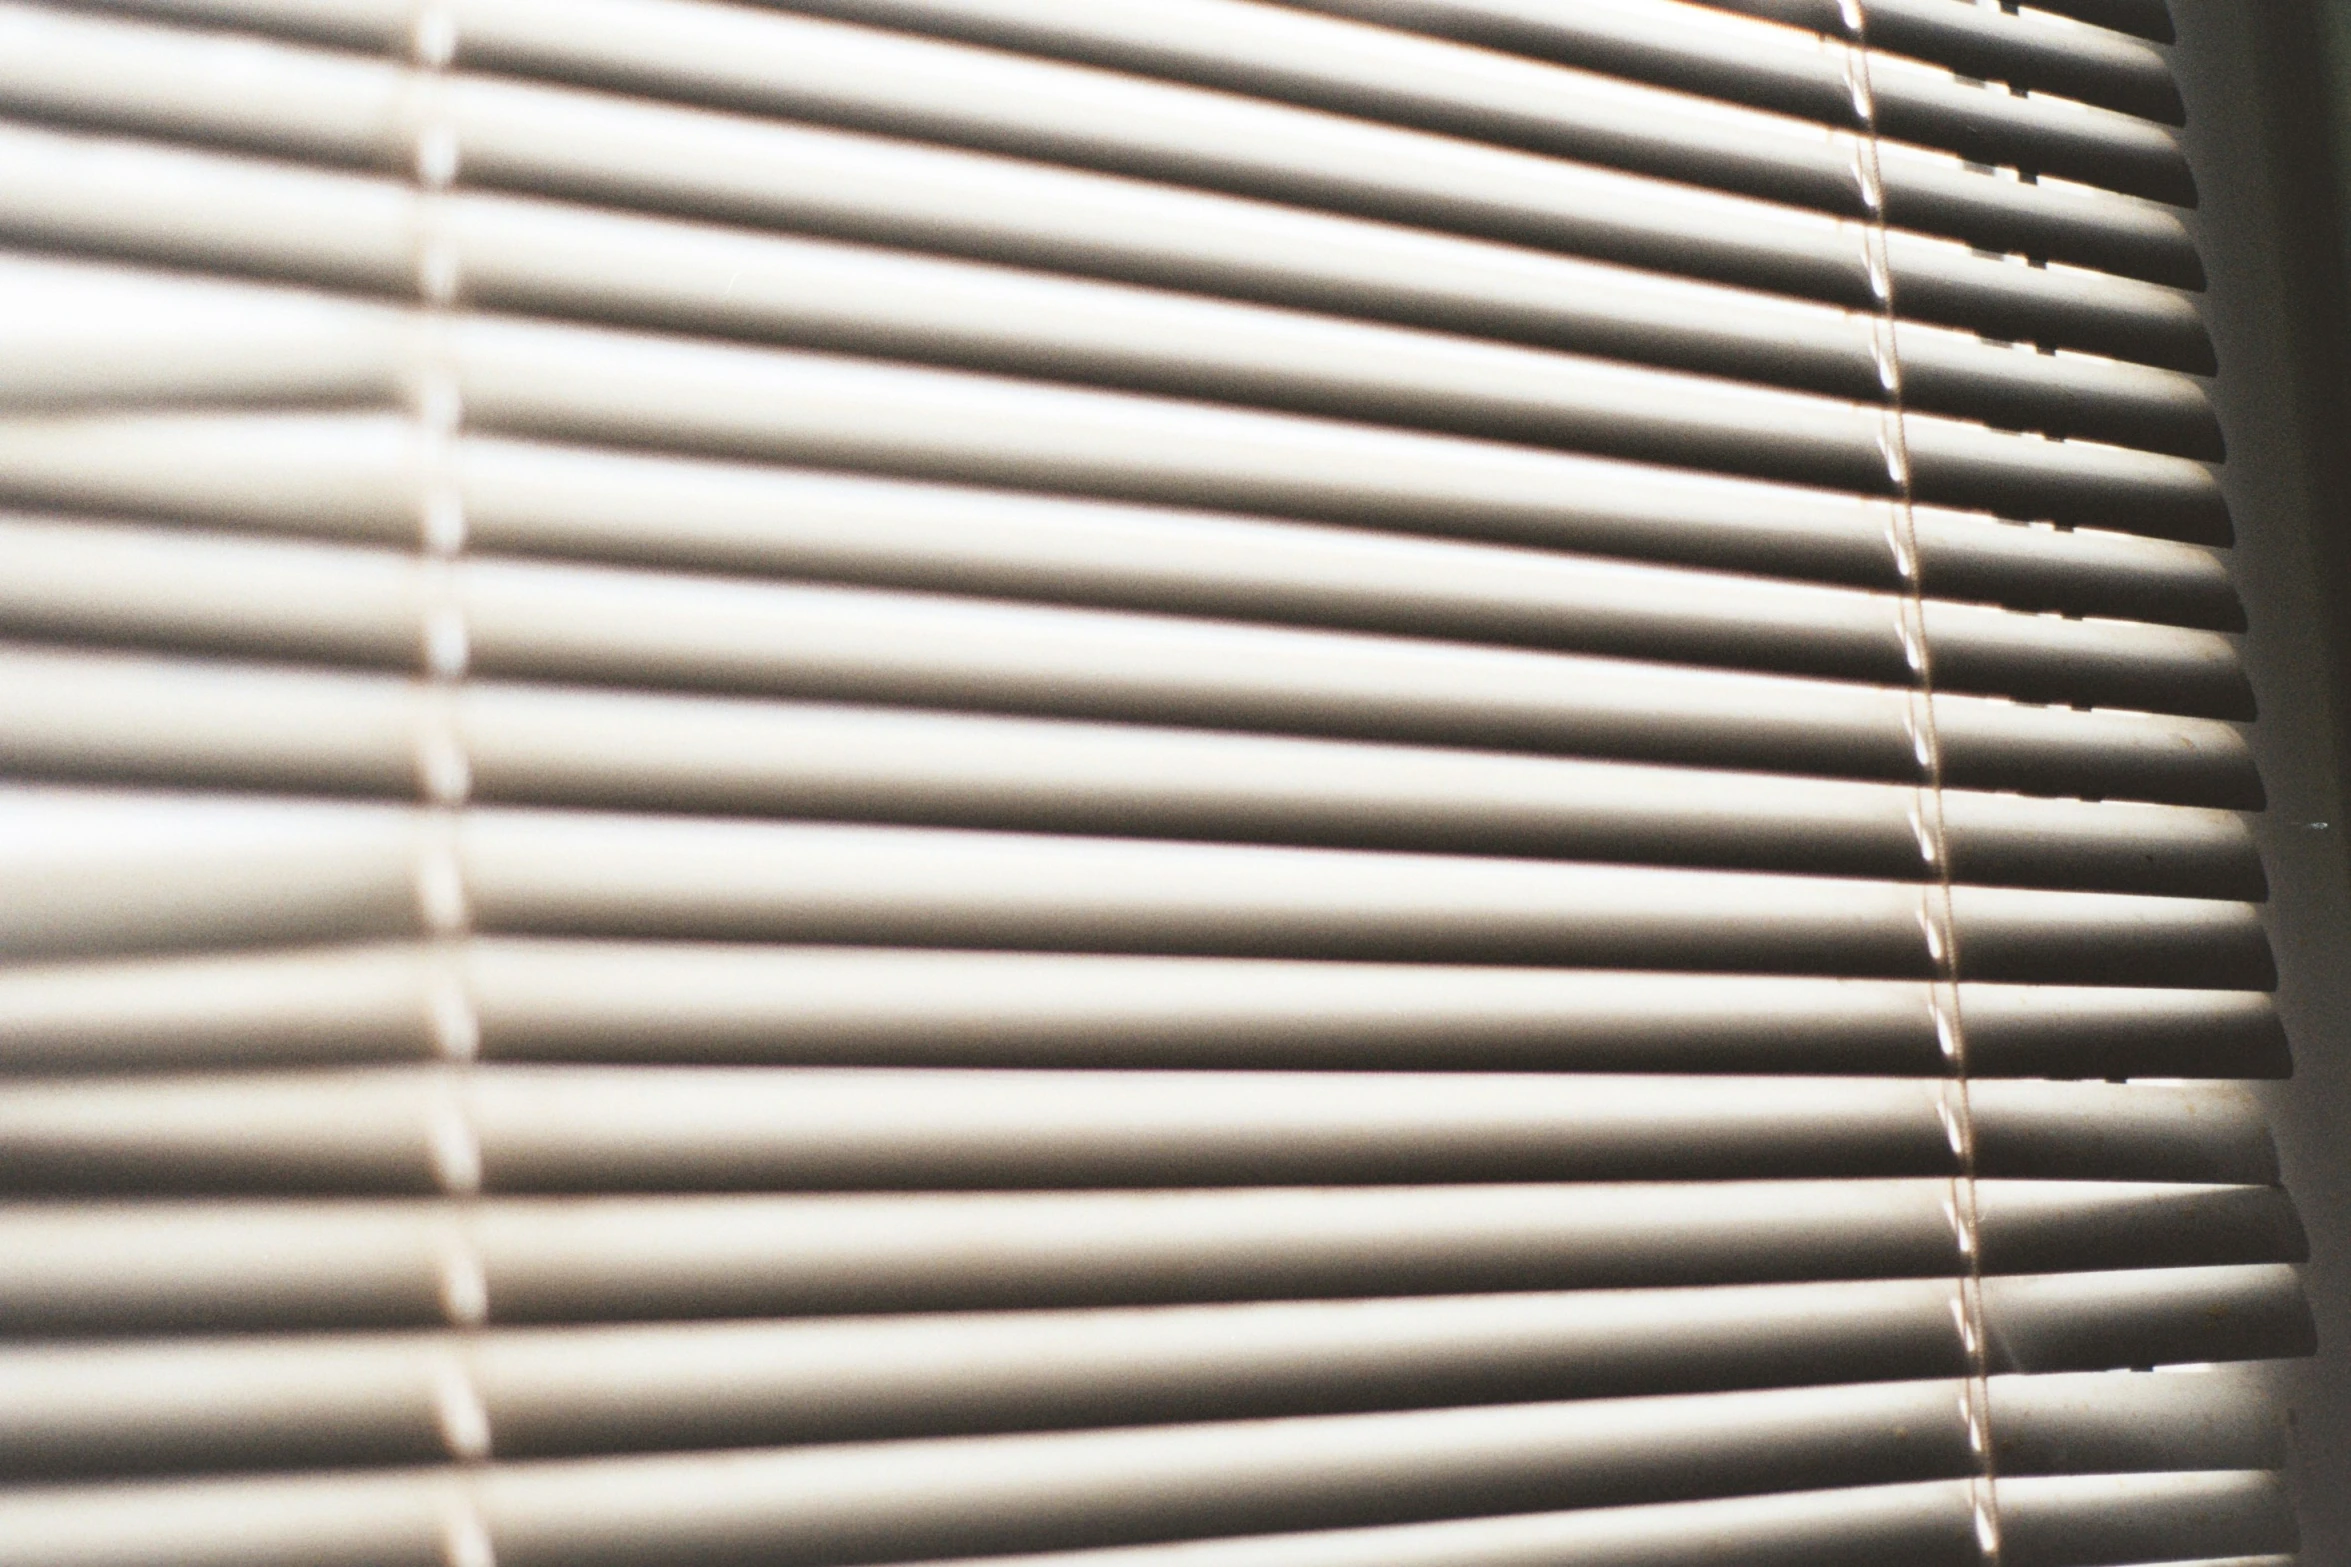 the sun is shining on a window with some blinds closed